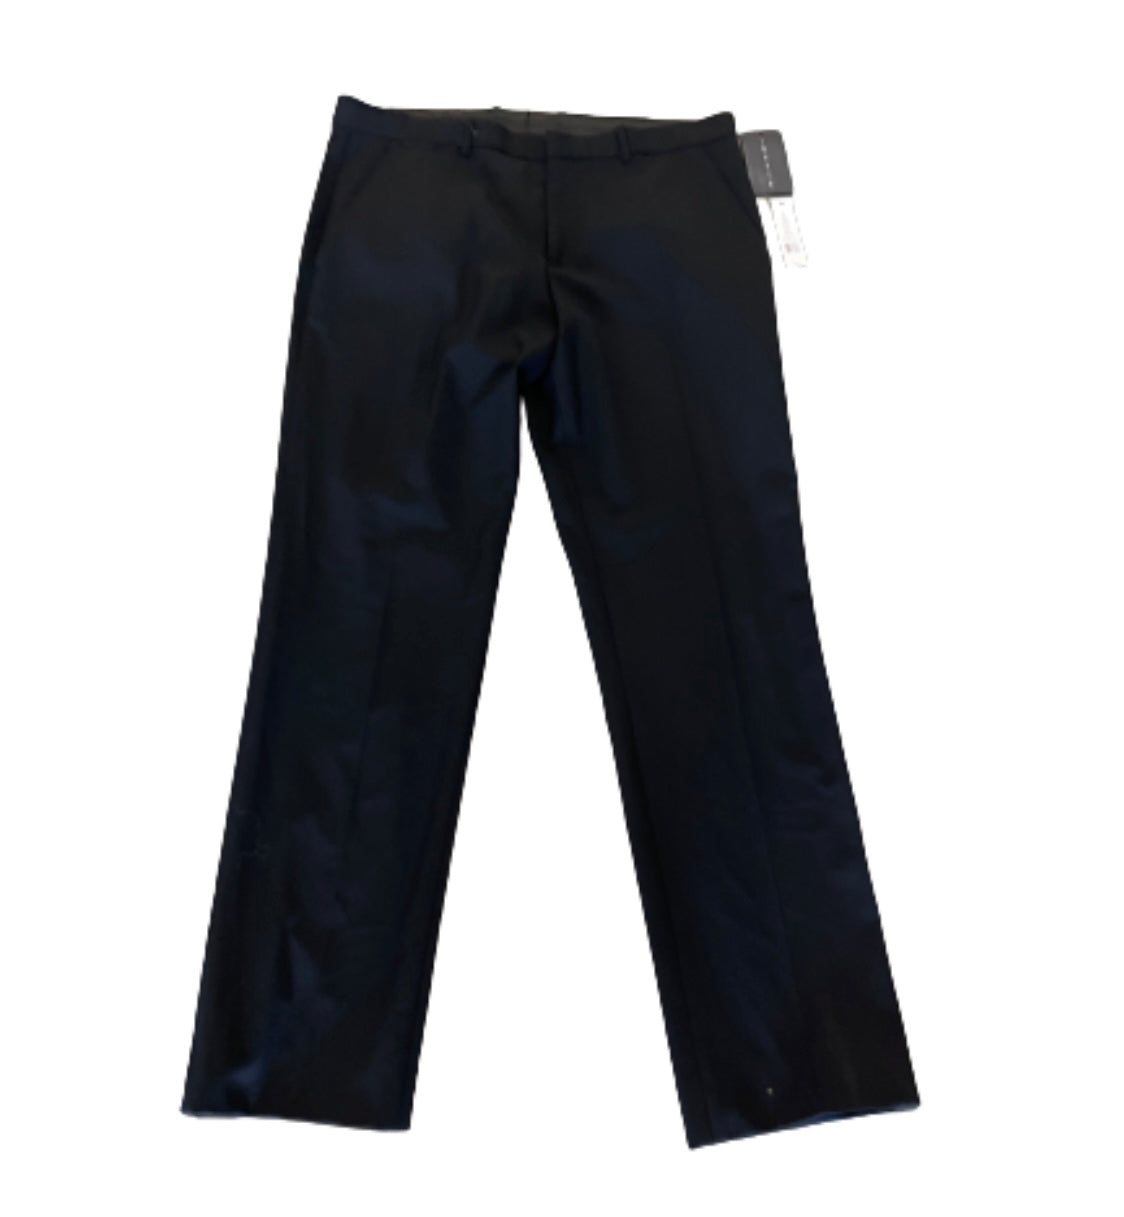 BONES: Agent Booth’s Charcoal THEORY Pants (36)